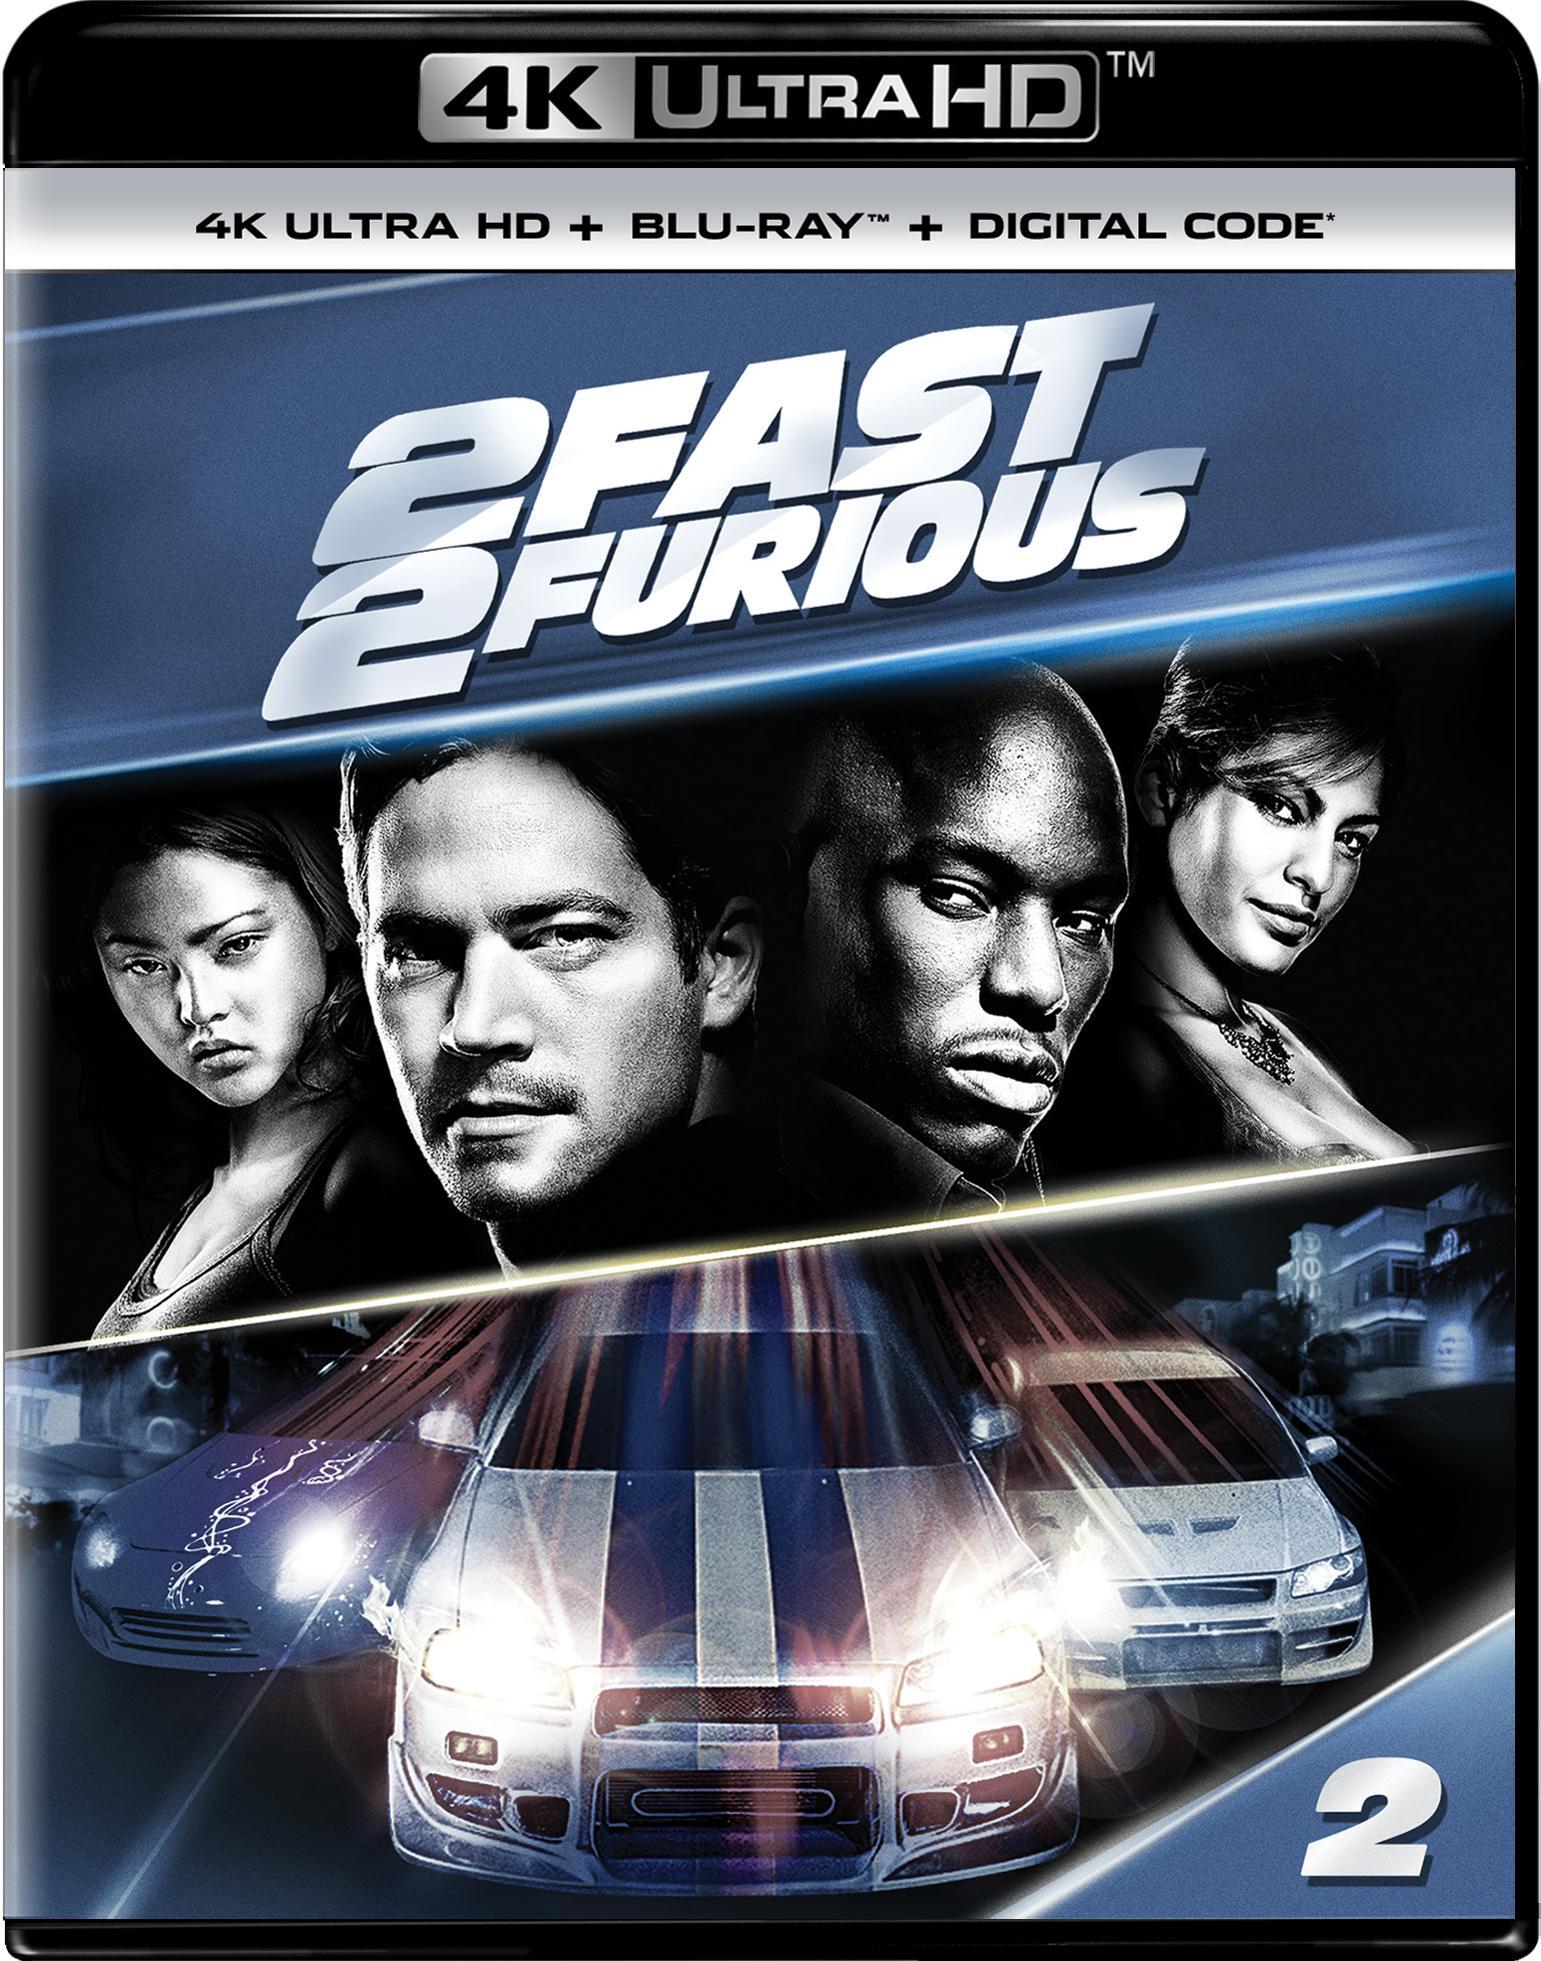 2 Fast 2 Furious (4K Ultra HD) - UHD [ 2003 ]  - Action Movies On 4K Ultra HD Blu-ray - Movies On GRUV